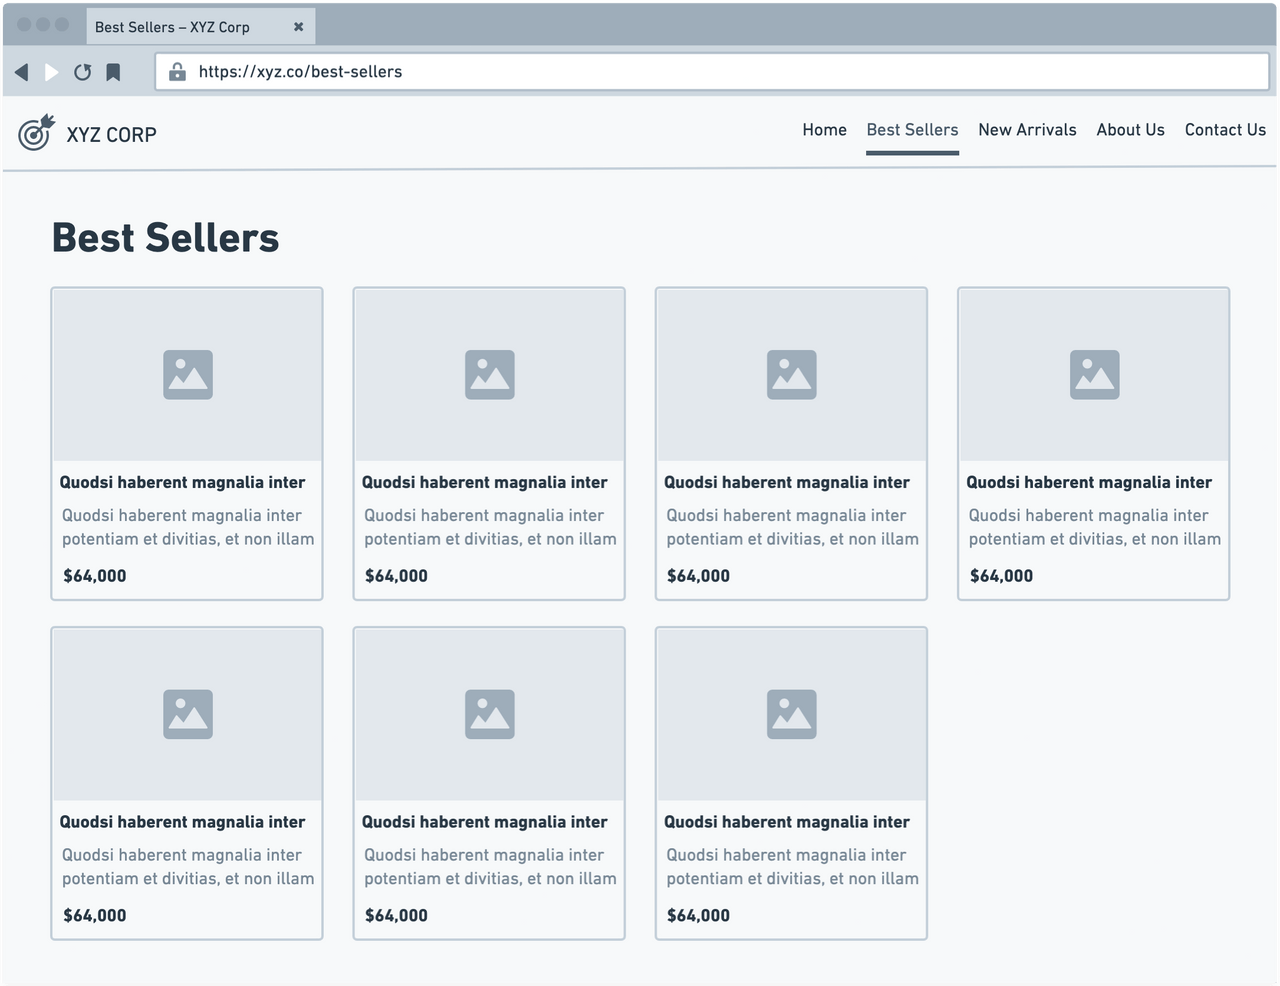 Mockup of a website Best Sellers page for XYZ corporation showing a list of product results.